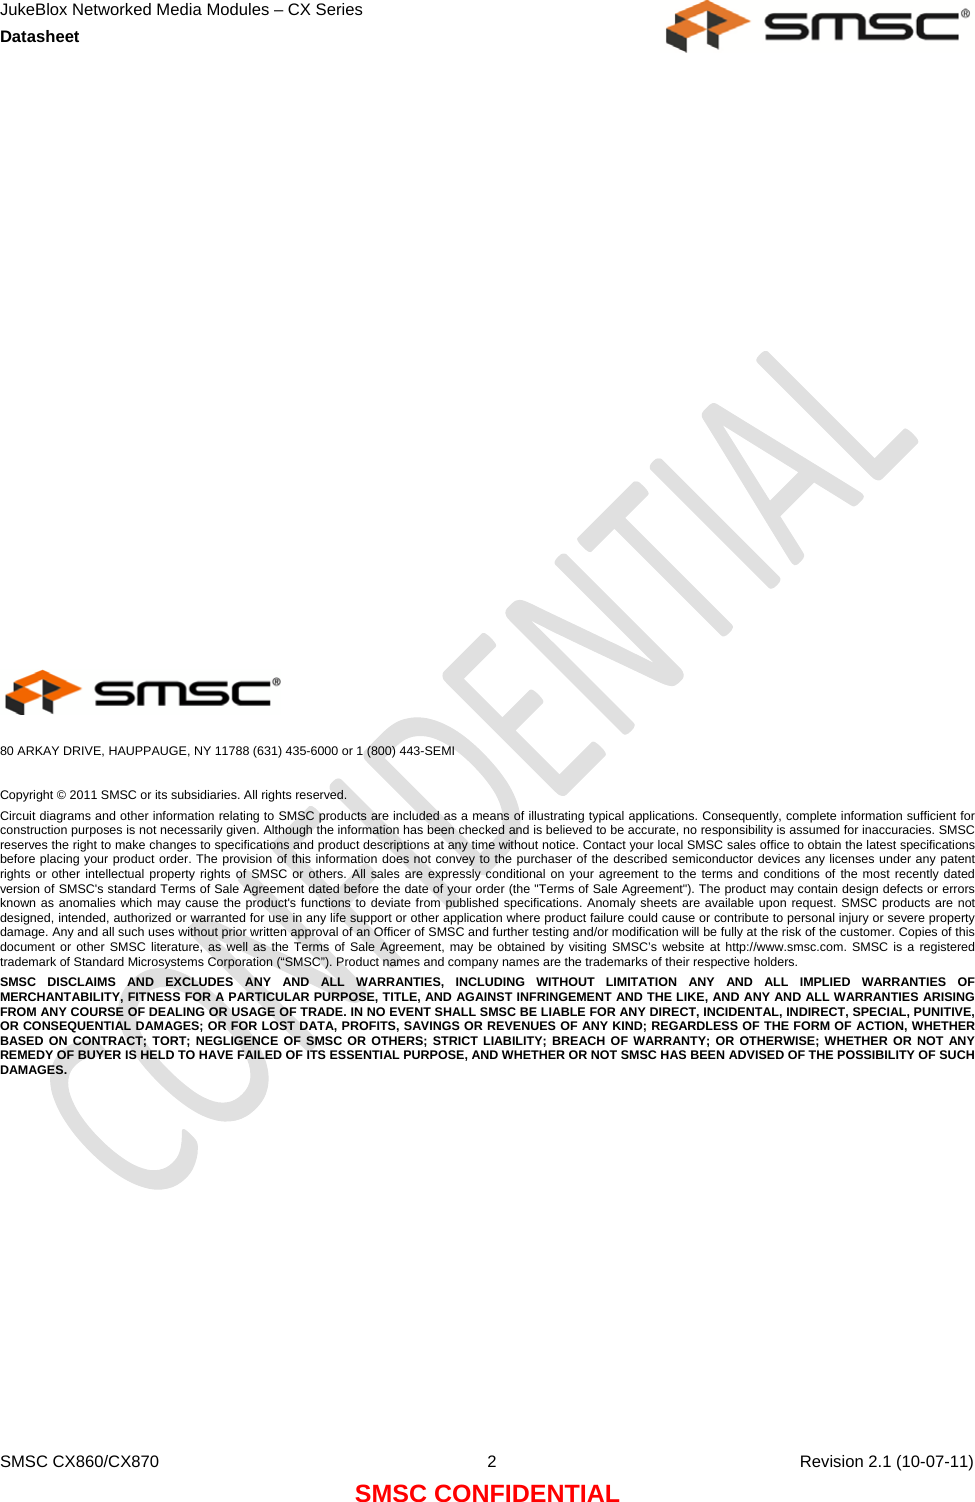 JukeBlox Networked Media Modules – CX Series  Datasheet    SMSC CX860/CX870  2    Revision 2.1 (10-07-11) SMSC CONFIDENTIAL                      80 ARKAY DRIVE, HAUPPAUGE, NY 11788 (631) 435-6000 or 1 (800) 443-SEMI  Copyright © 2011 SMSC or its subsidiaries. All rights reserved. Circuit diagrams and other information relating to SMSC products are included as a means of illustrating typical applications. Consequently, complete information sufficient for construction purposes is not necessarily given. Although the information has been checked and is believed to be accurate, no responsibility is assumed for inaccuracies. SMSC reserves the right to make changes to specifications and product descriptions at any time without notice. Contact your local SMSC sales office to obtain the latest specifications before placing your product order. The provision of this information does not convey to the purchaser of the described semiconductor devices any licenses under any patent rights or other intellectual property rights of SMSC or others. All sales are expressly conditional on your agreement to the terms and conditions of the most recently dated version of SMSC&apos;s standard Terms of Sale Agreement dated before the date of your order (the &quot;Terms of Sale Agreement&quot;). The product may contain design defects or errors known as anomalies which may cause the product&apos;s functions to deviate from published specifications. Anomaly sheets are available upon request. SMSC products are not designed, intended, authorized or warranted for use in any life support or other application where product failure could cause or contribute to personal injury or severe property damage. Any and all such uses without prior written approval of an Officer of SMSC and further testing and/or modification will be fully at the risk of the customer. Copies of this document or other SMSC literature, as well as the Terms of Sale Agreement, may be obtained by visiting SMSC’s website at http://www.smsc.com. SMSC is a registered trademark of Standard Microsystems Corporation (“SMSC”). Product names and company names are the trademarks of their respective holders.  SMSC DISCLAIMS AND EXCLUDES ANY AND ALL WARRANTIES, INCLUDING WITHOUT LIMITATION ANY AND ALL IMPLIED WARRANTIES OF MERCHANTABILITY, FITNESS FOR A PARTICULAR PURPOSE, TITLE, AND AGAINST INFRINGEMENT AND THE LIKE, AND ANY AND ALL WARRANTIES ARISING FROM ANY COURSE OF DEALING OR USAGE OF TRADE. IN NO EVENT SHALL SMSC BE LIABLE FOR ANY DIRECT, INCIDENTAL, INDIRECT, SPECIAL, PUNITIVE, OR CONSEQUENTIAL DAMAGES; OR FOR LOST DATA, PROFITS, SAVINGS OR REVENUES OF ANY KIND; REGARDLESS OF THE FORM OF ACTION, WHETHER BASED ON CONTRACT; TORT; NEGLIGENCE OF SMSC OR OTHERS; STRICT LIABILITY; BREACH OF WARRANTY; OR OTHERWISE; WHETHER OR NOT ANY REMEDY OF BUYER IS HELD TO HAVE FAILED OF ITS ESSENTIAL PURPOSE, AND WHETHER OR NOT SMSC HAS BEEN ADVISED OF THE POSSIBILITY OF SUCH DAMAGES.  